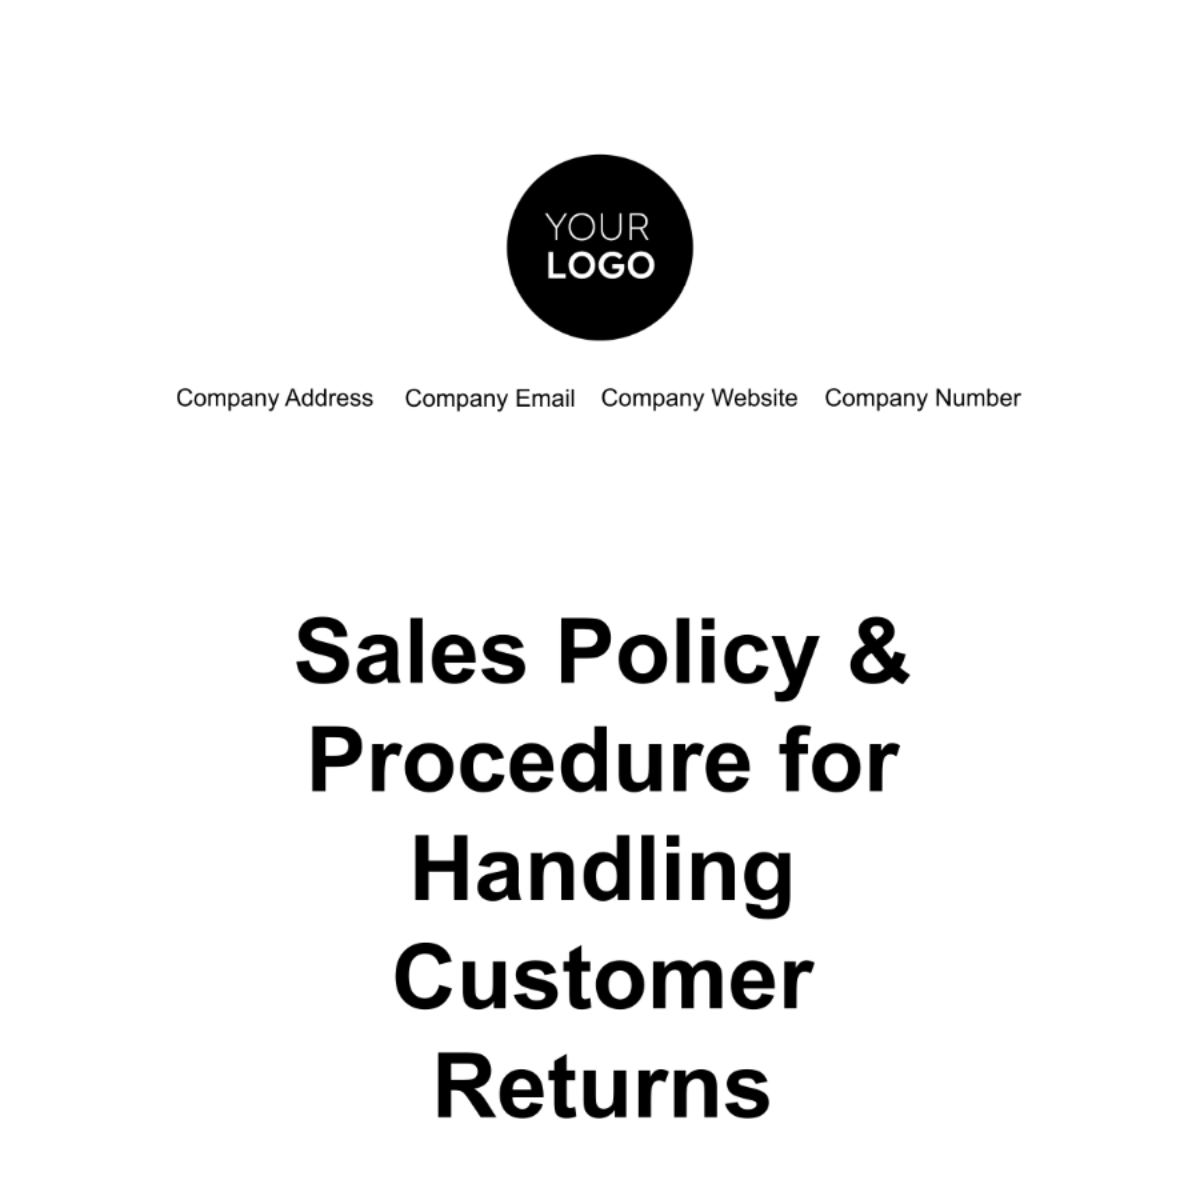 Free Sales Policy & Procedure for Handling Customer Returns Template